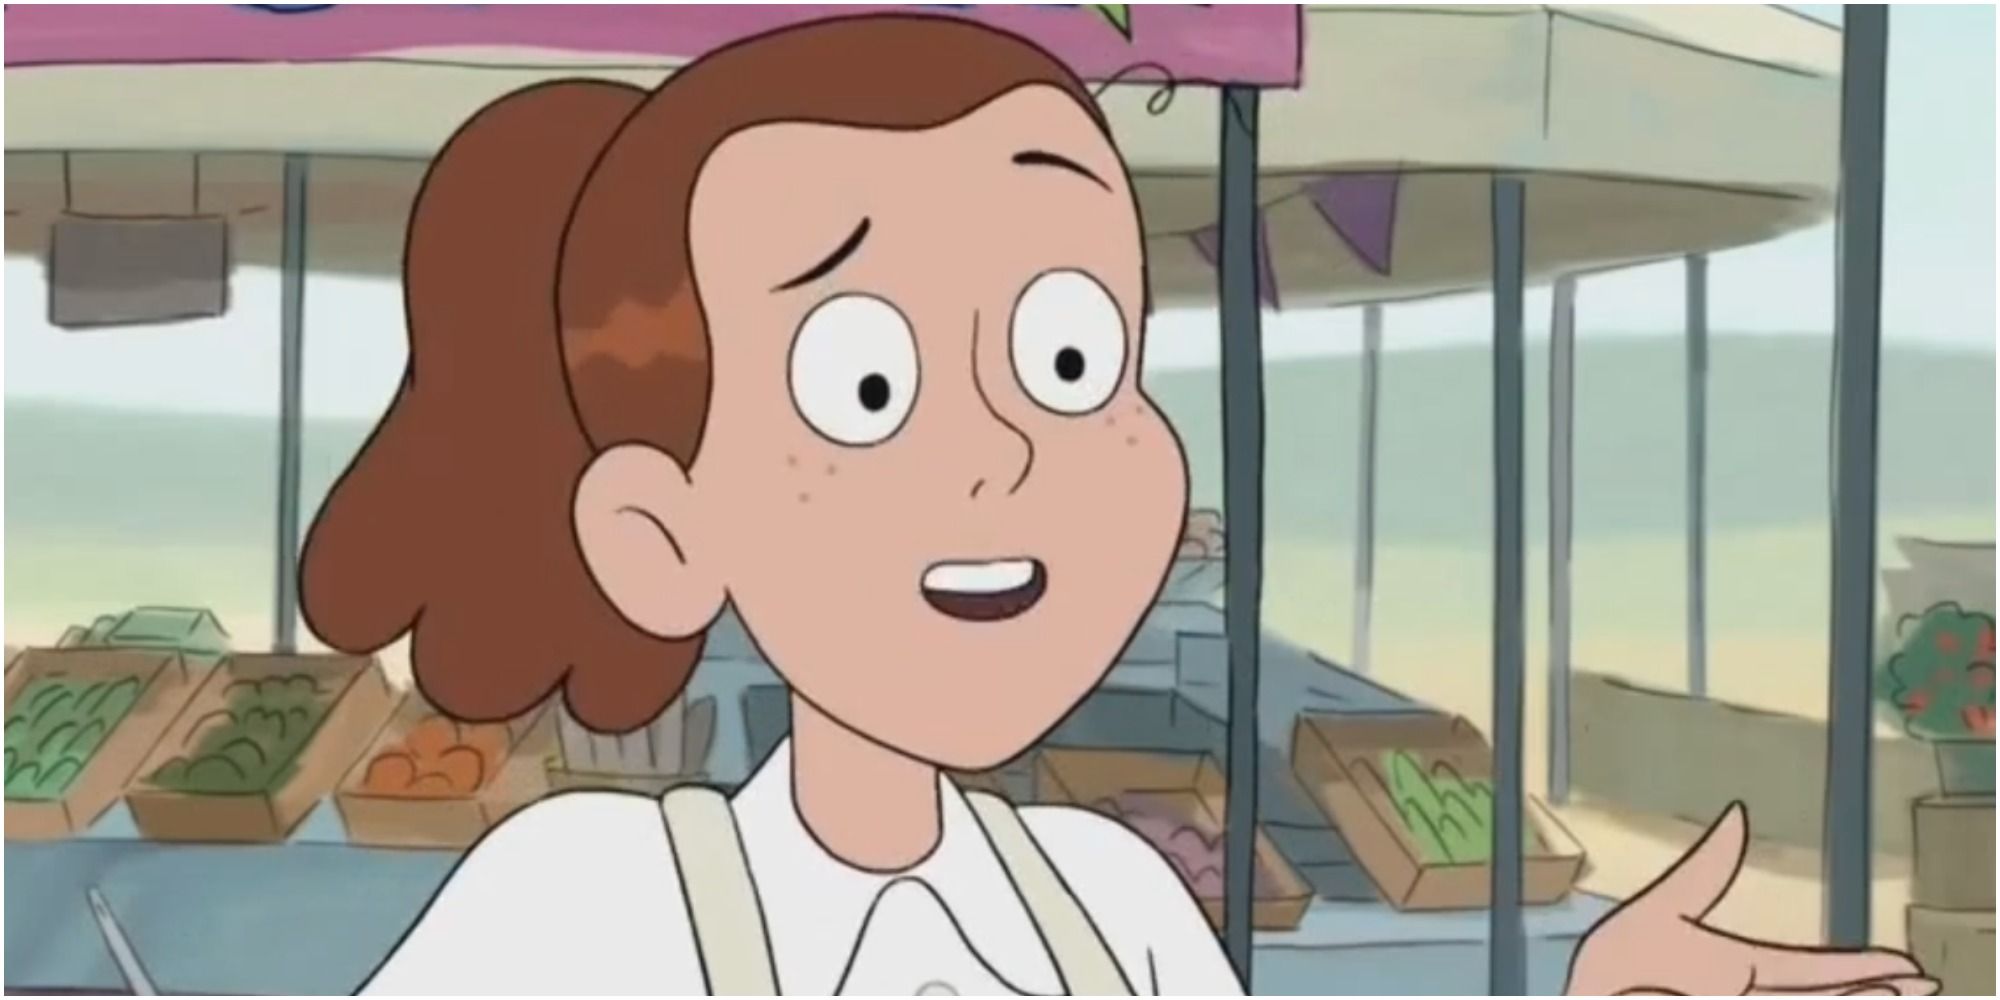 A screenshot of Ellie Kemper as Produce Lucy in We Bare Bears